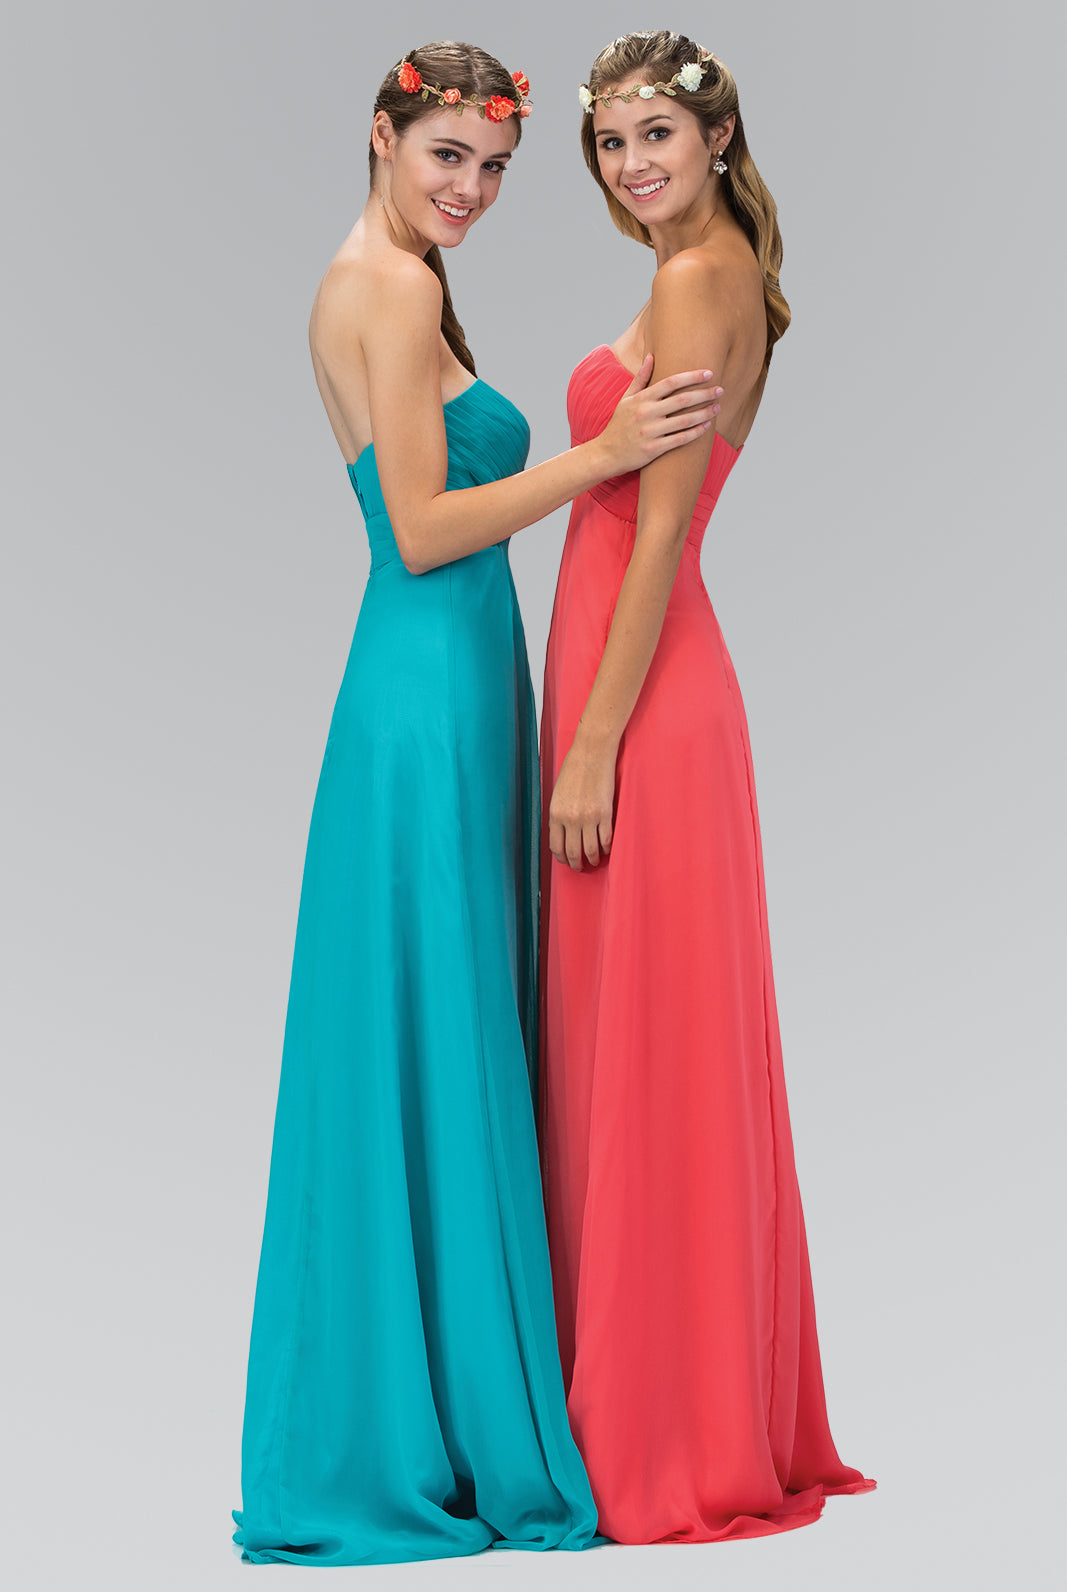 Strapless Chiffon Long Dress with Pleated Bodice-smcdress